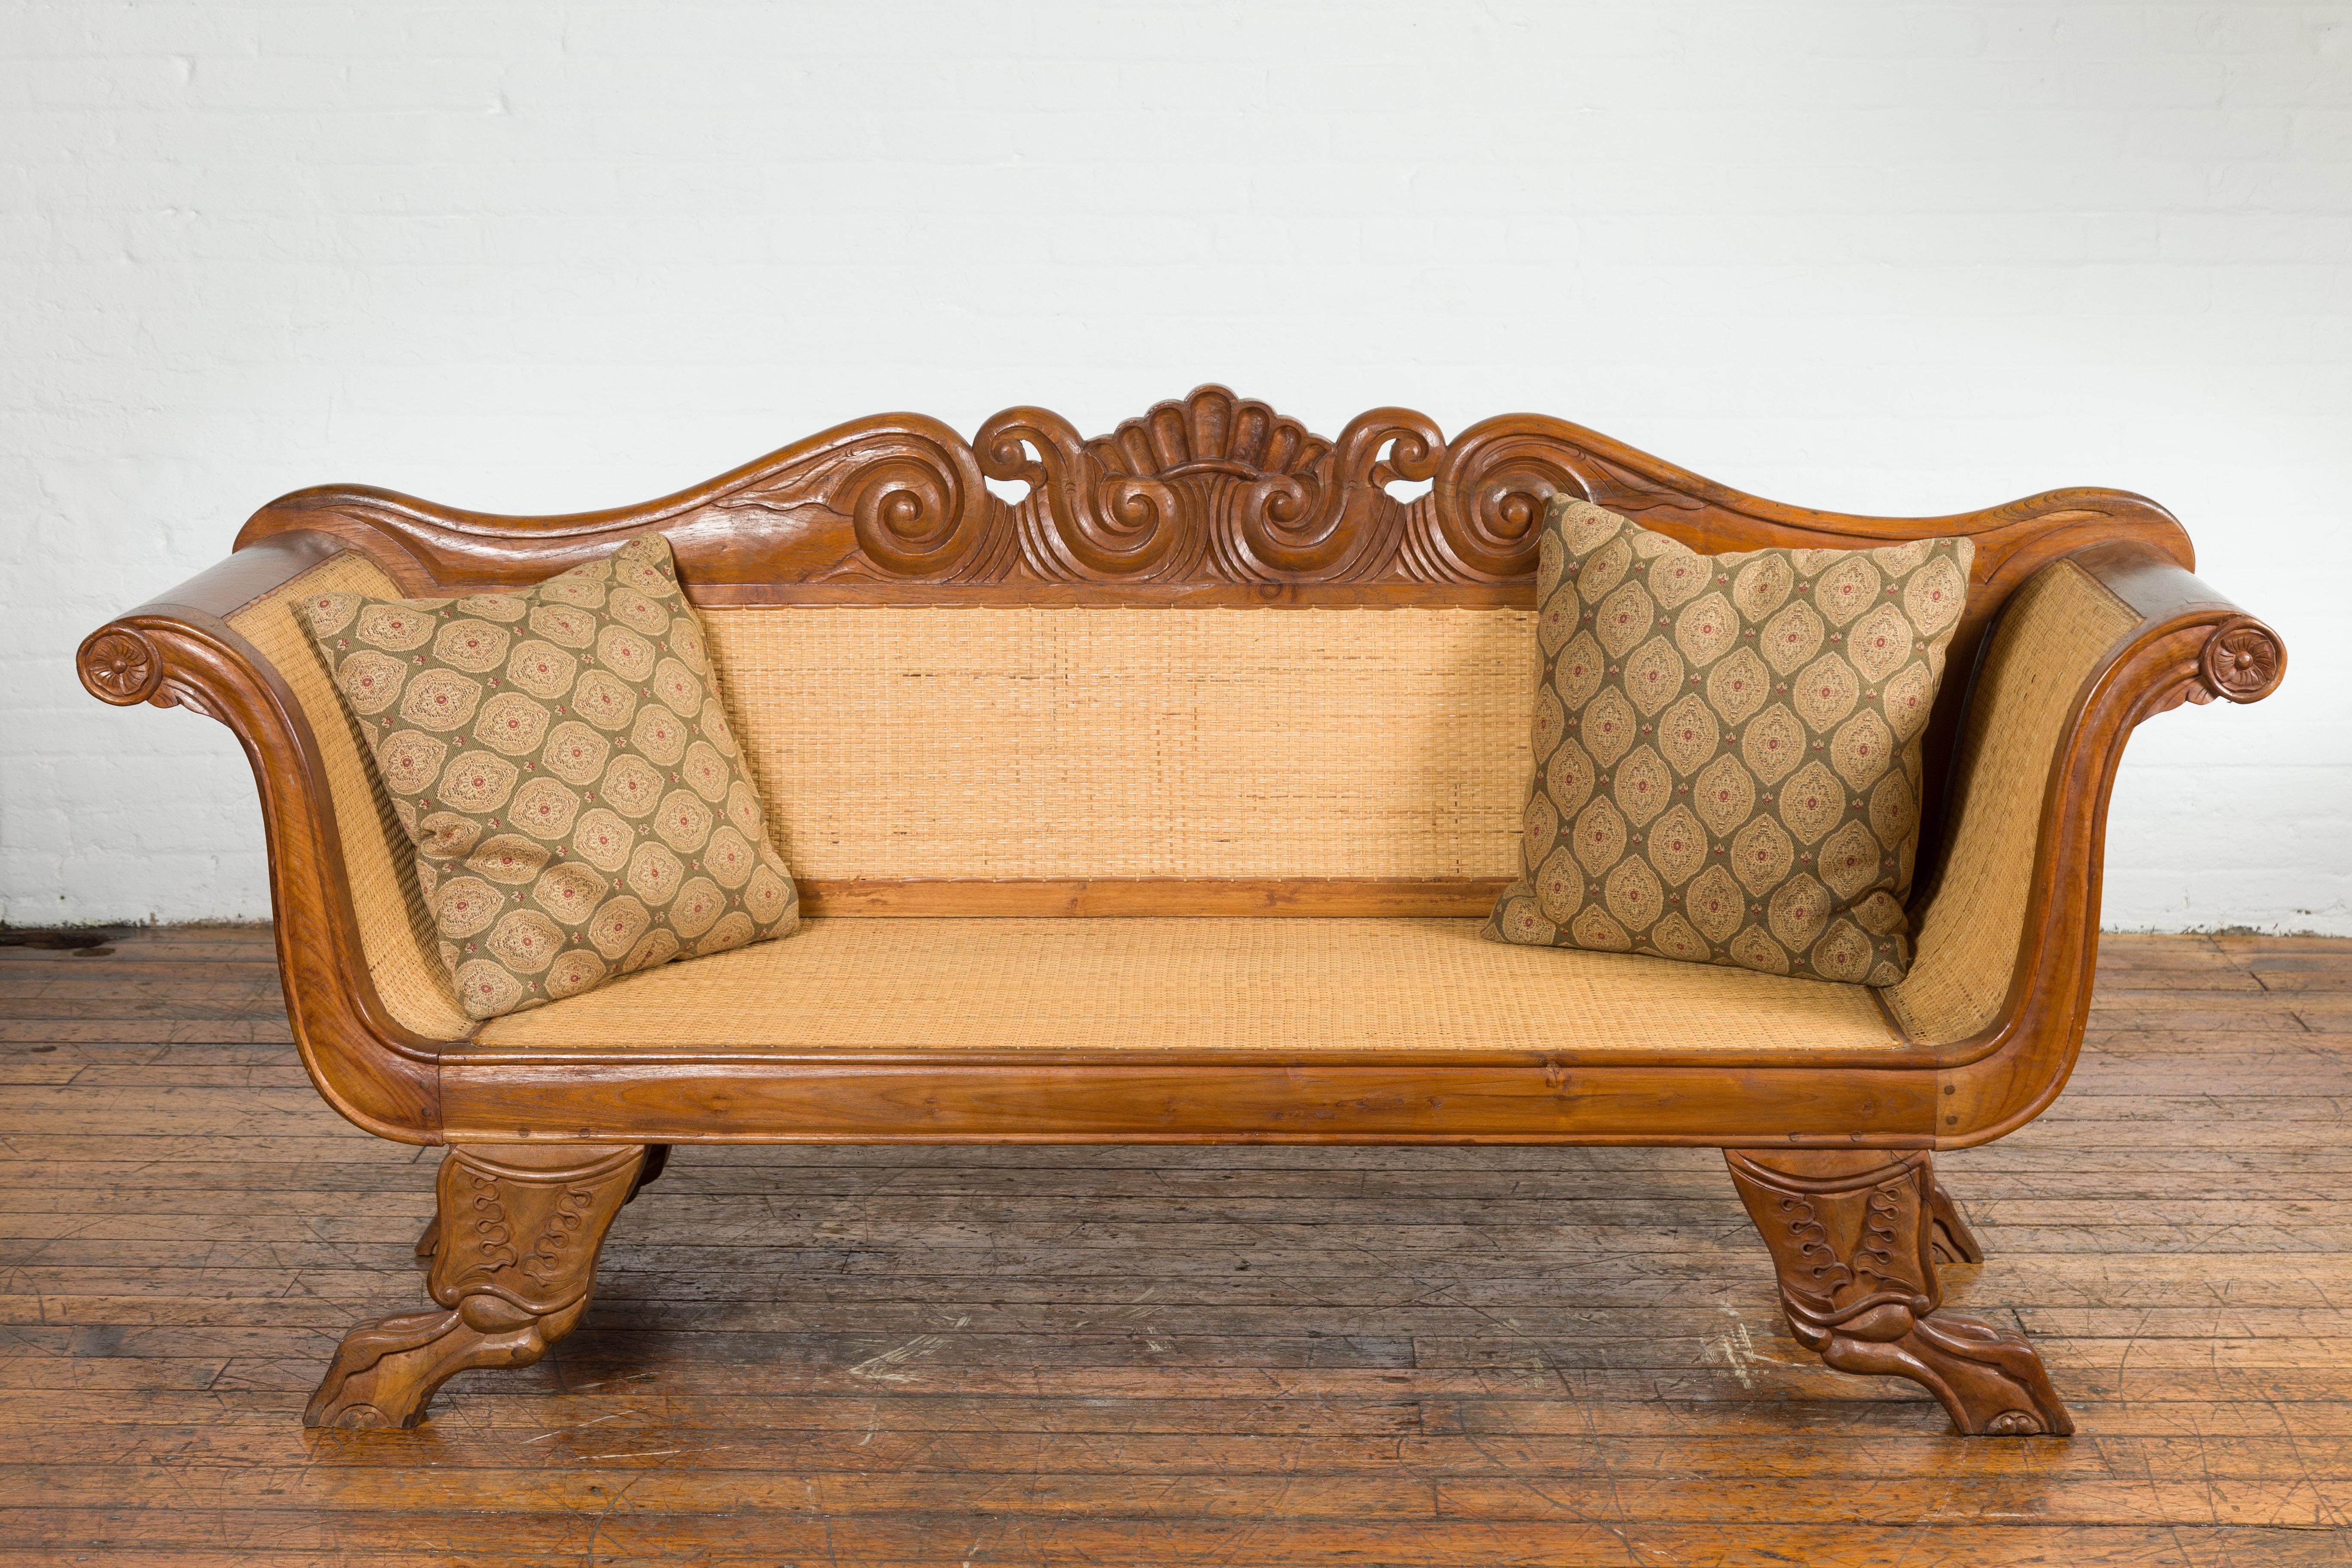 Dutch Colonial Javanese Teak Settee with Carved Décor and Inset Woven Rattan For Sale 9